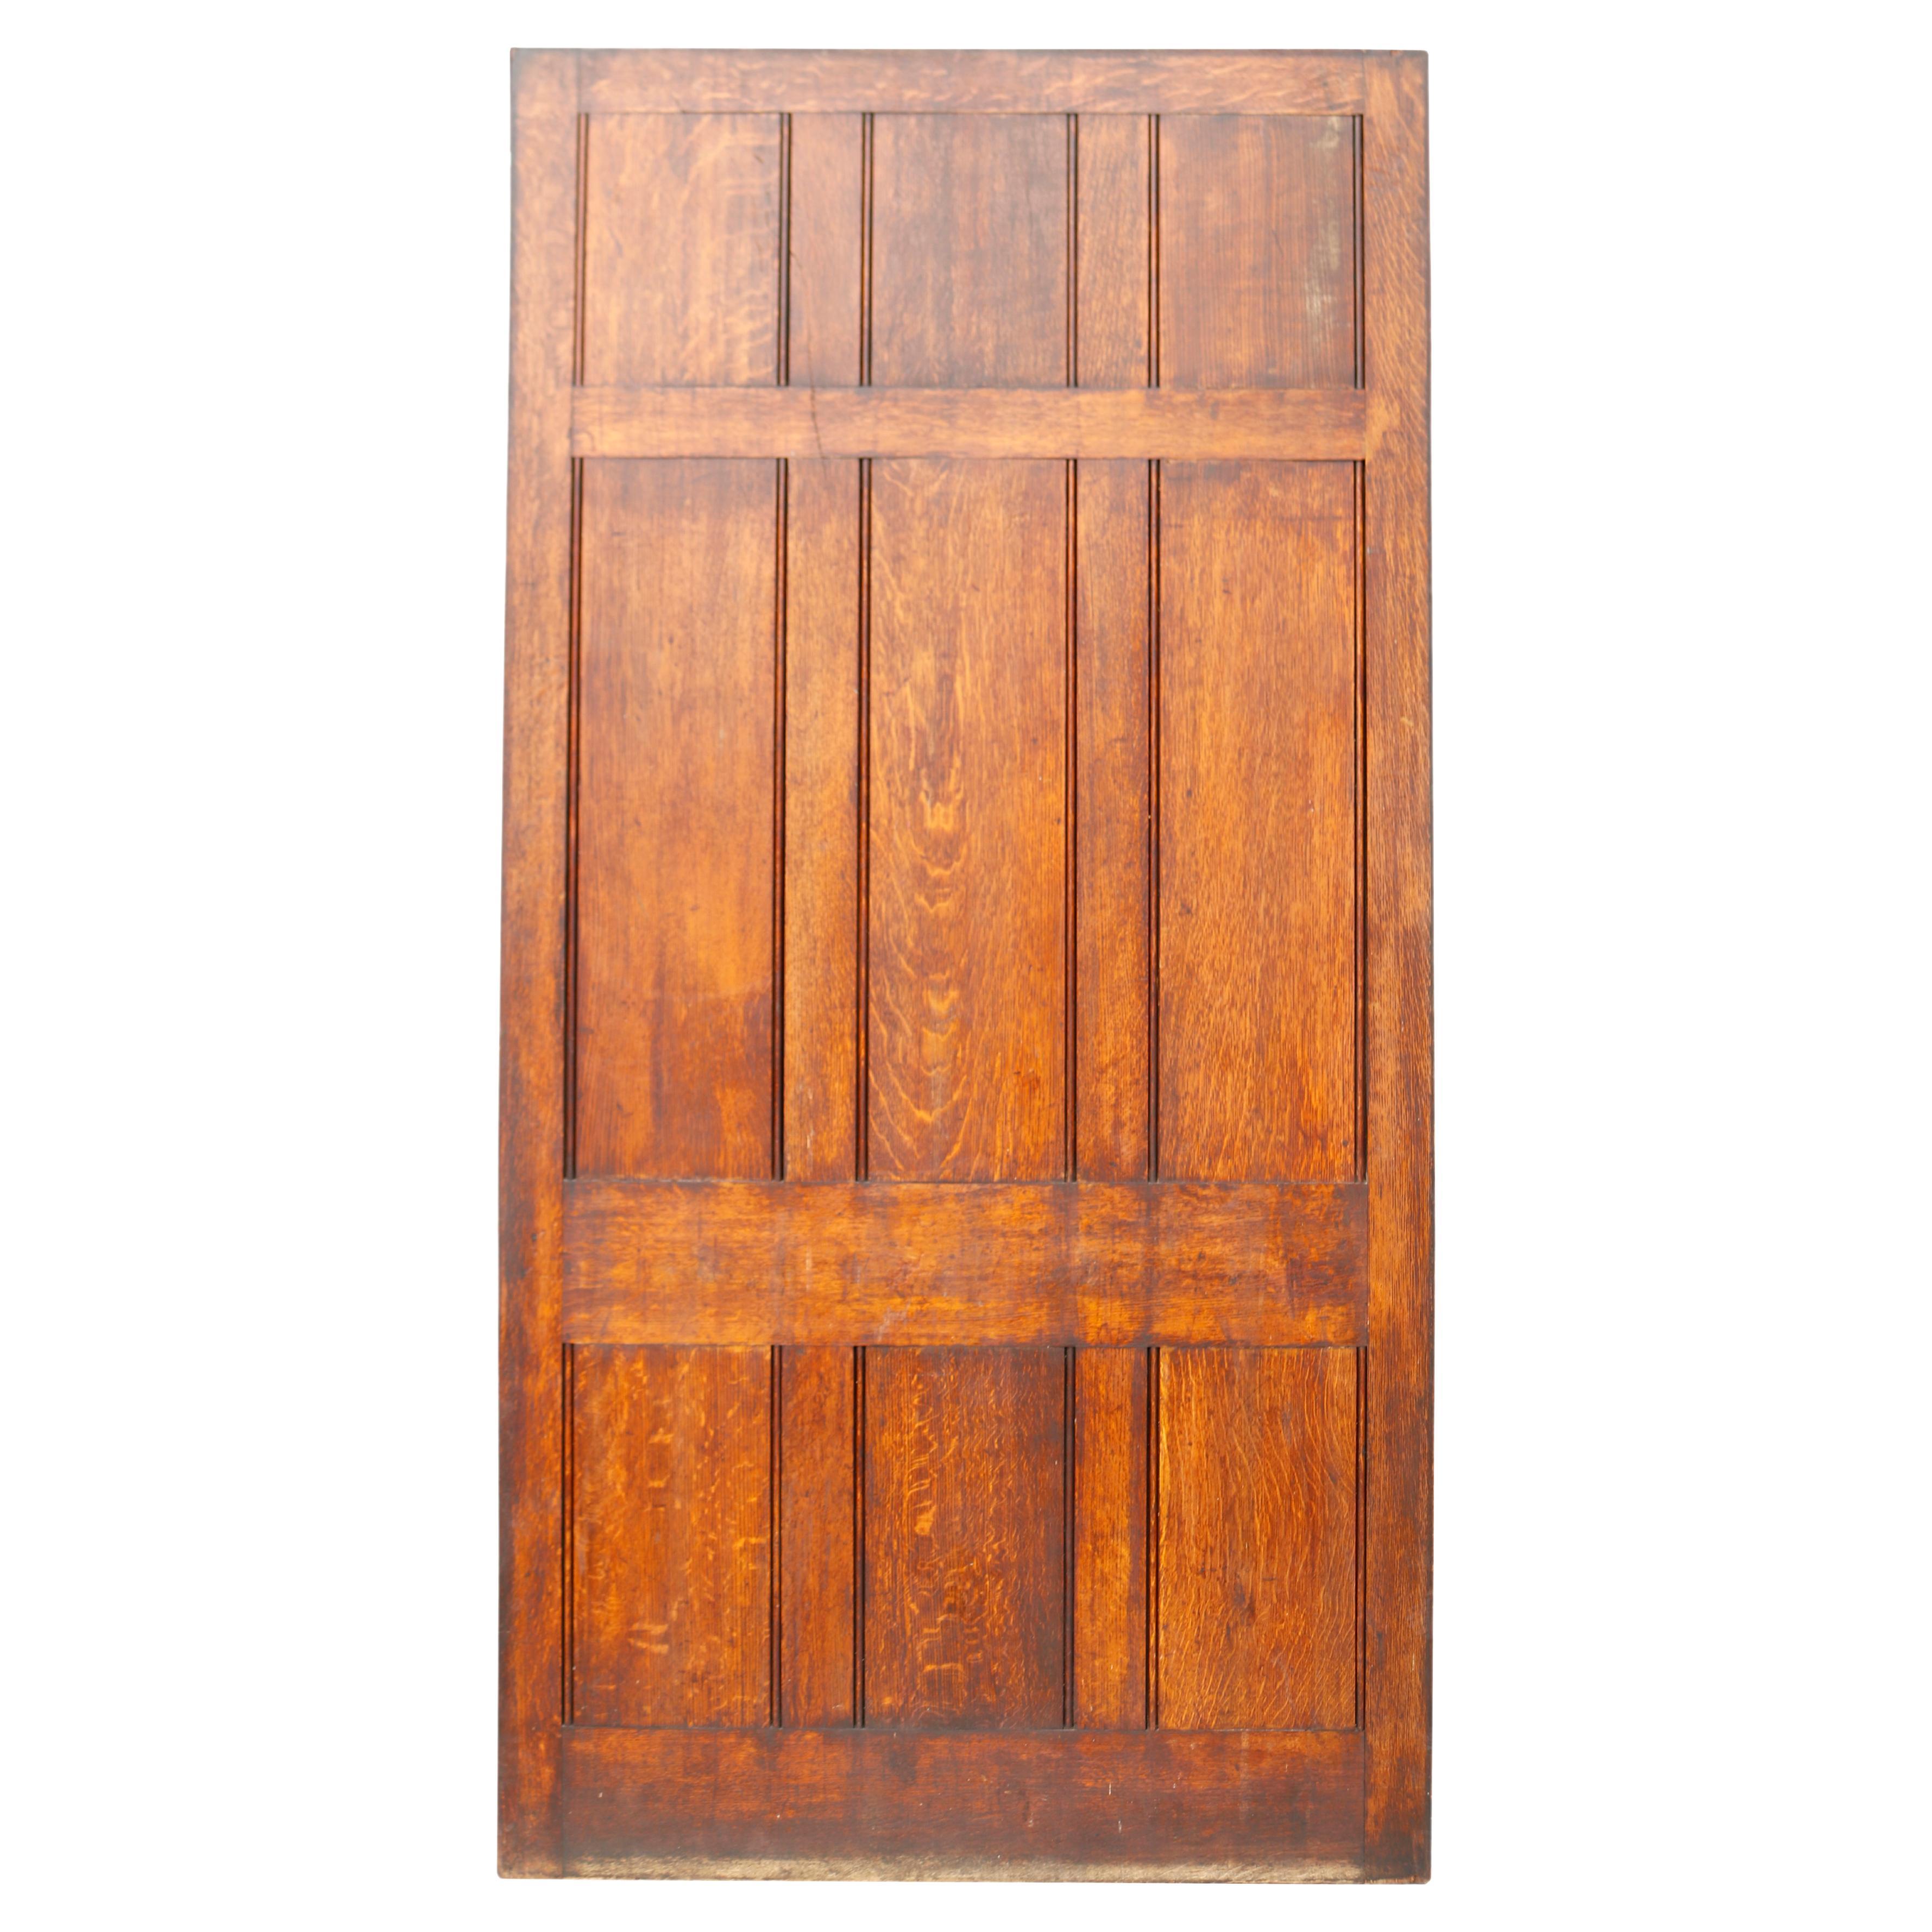 Large Scale Solid Oak Doors For Sale